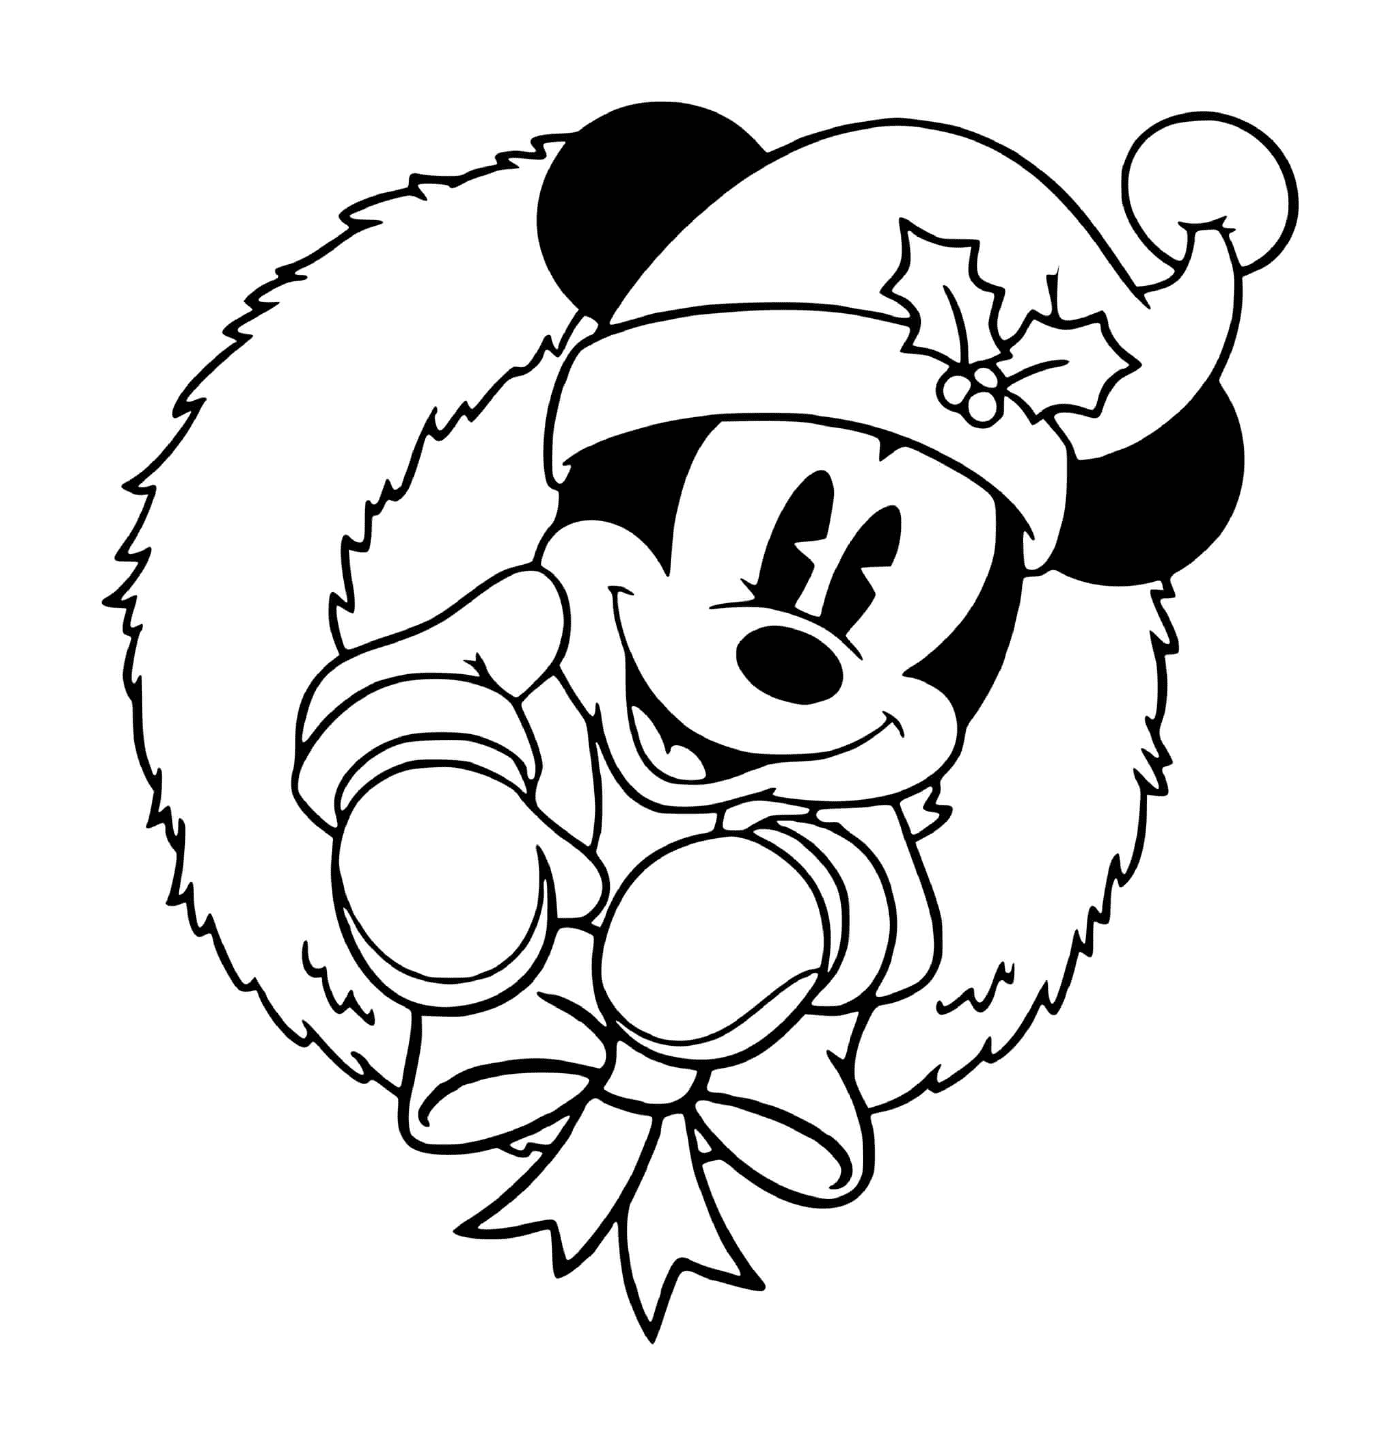  Mickey classic in a crown 